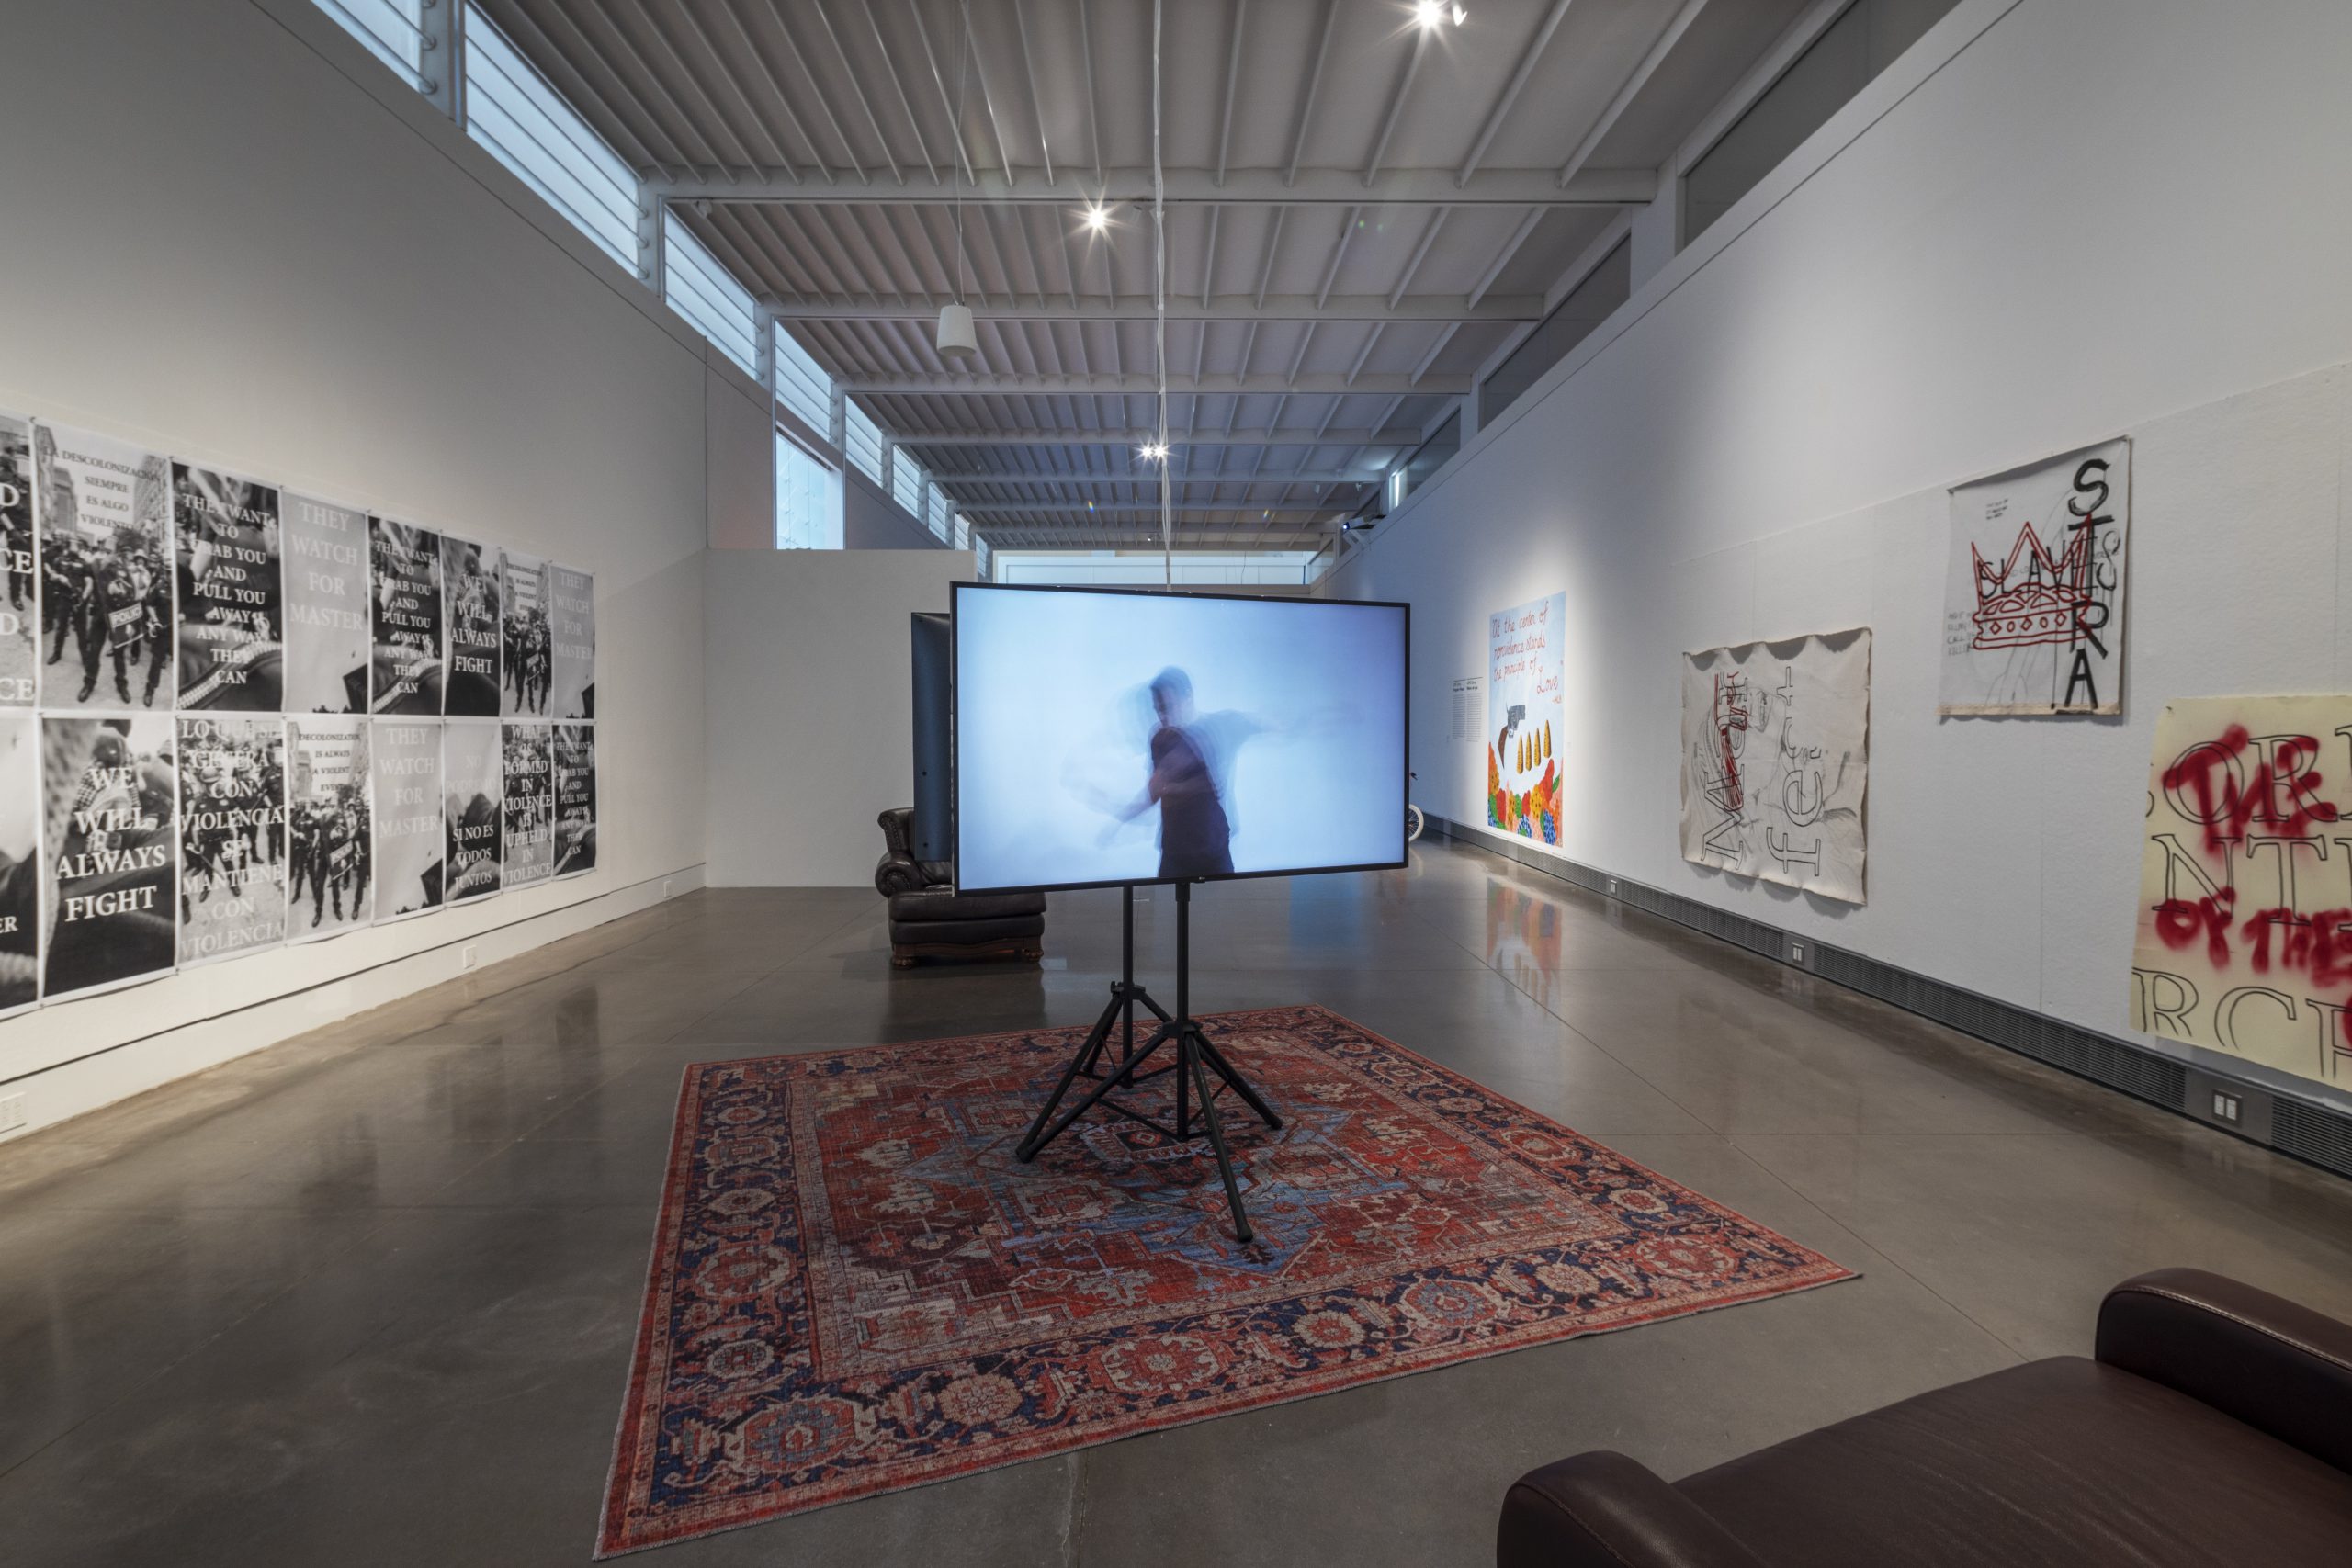 An exhibition space with text and image based art along its two longest walls. In the center is two, flat screens on tripods facing back-to-back. The screens are centered on a red, oriental rug, in between two, brown leather armchairs. On the screen facing forward is a man against a white backdrop. His form is blurred and gestural in a way that implies movement.